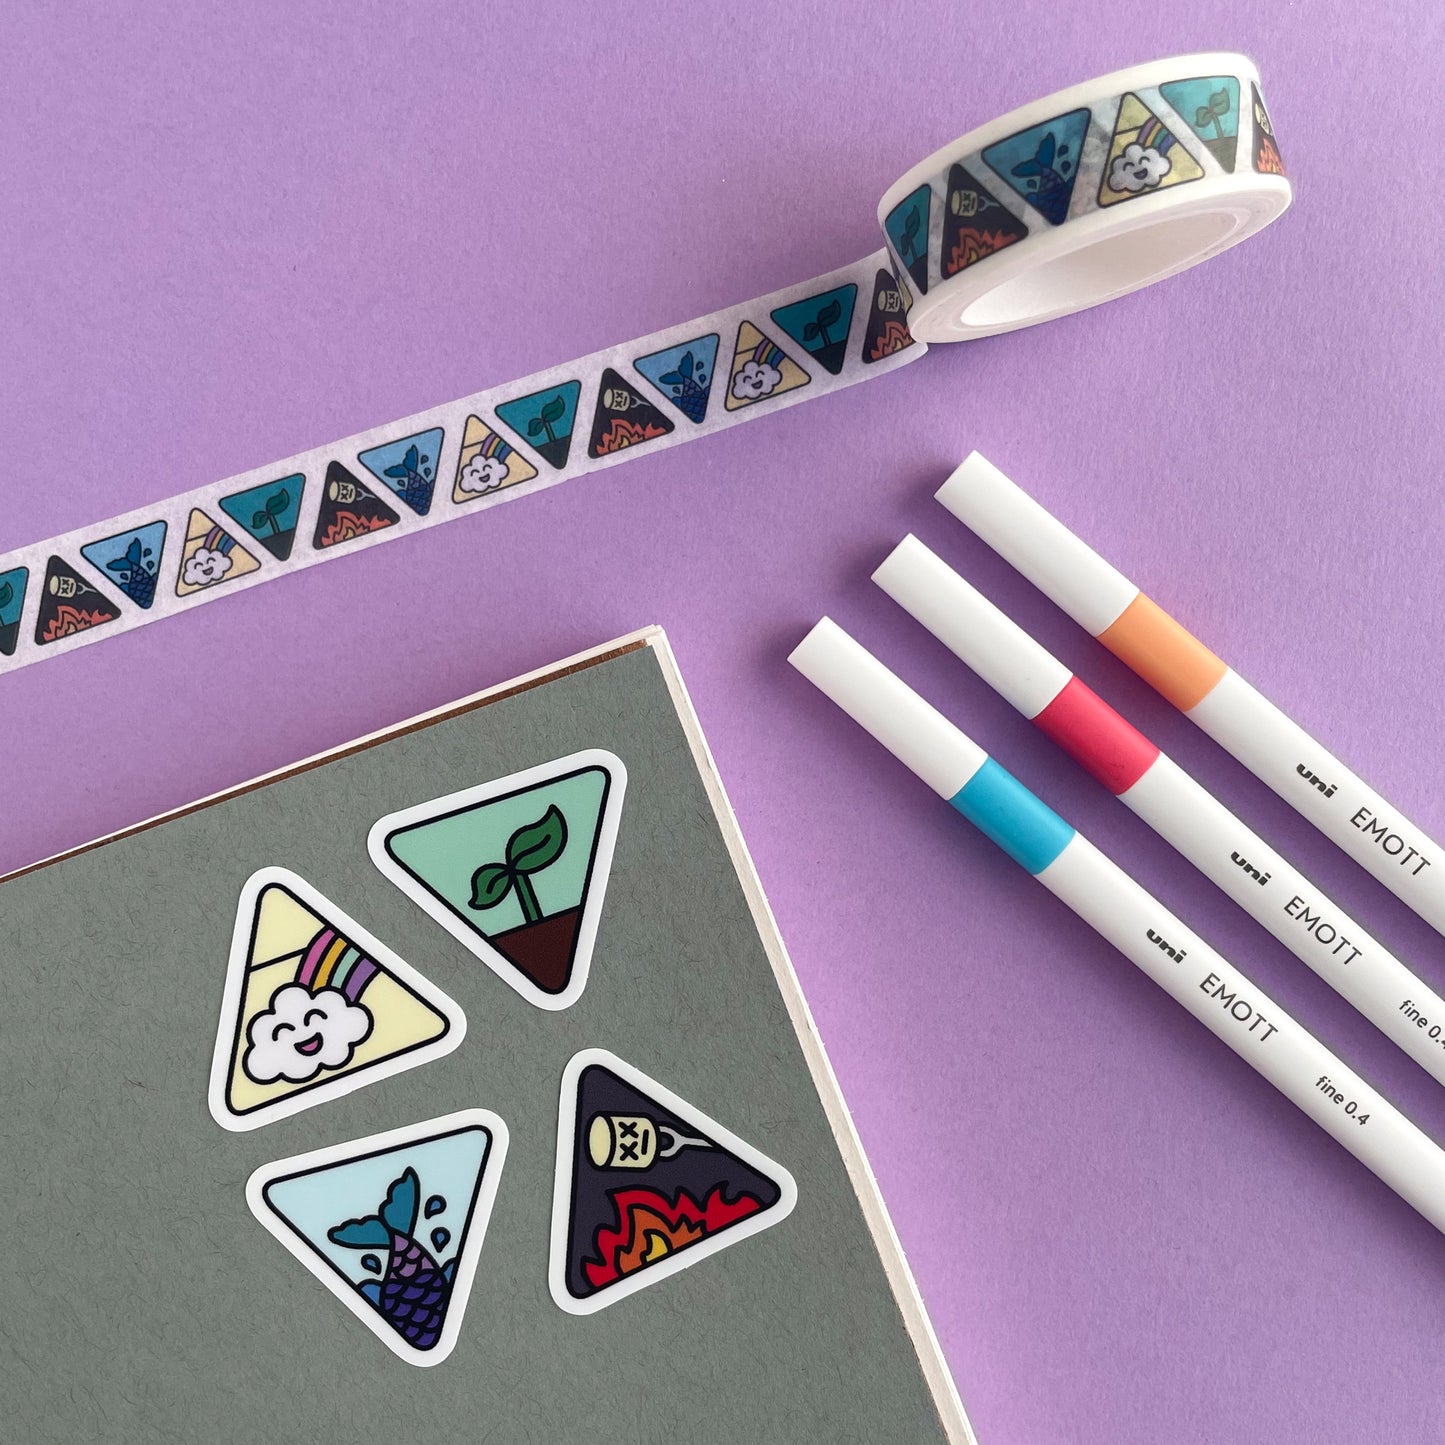 A grey notebook with stickers on it that are triangle shaped and have different cute representations of the four elements on them. There are some white pens and a roll of washi tape that matches the stickers around the notebook. All of this is on a lavender background.